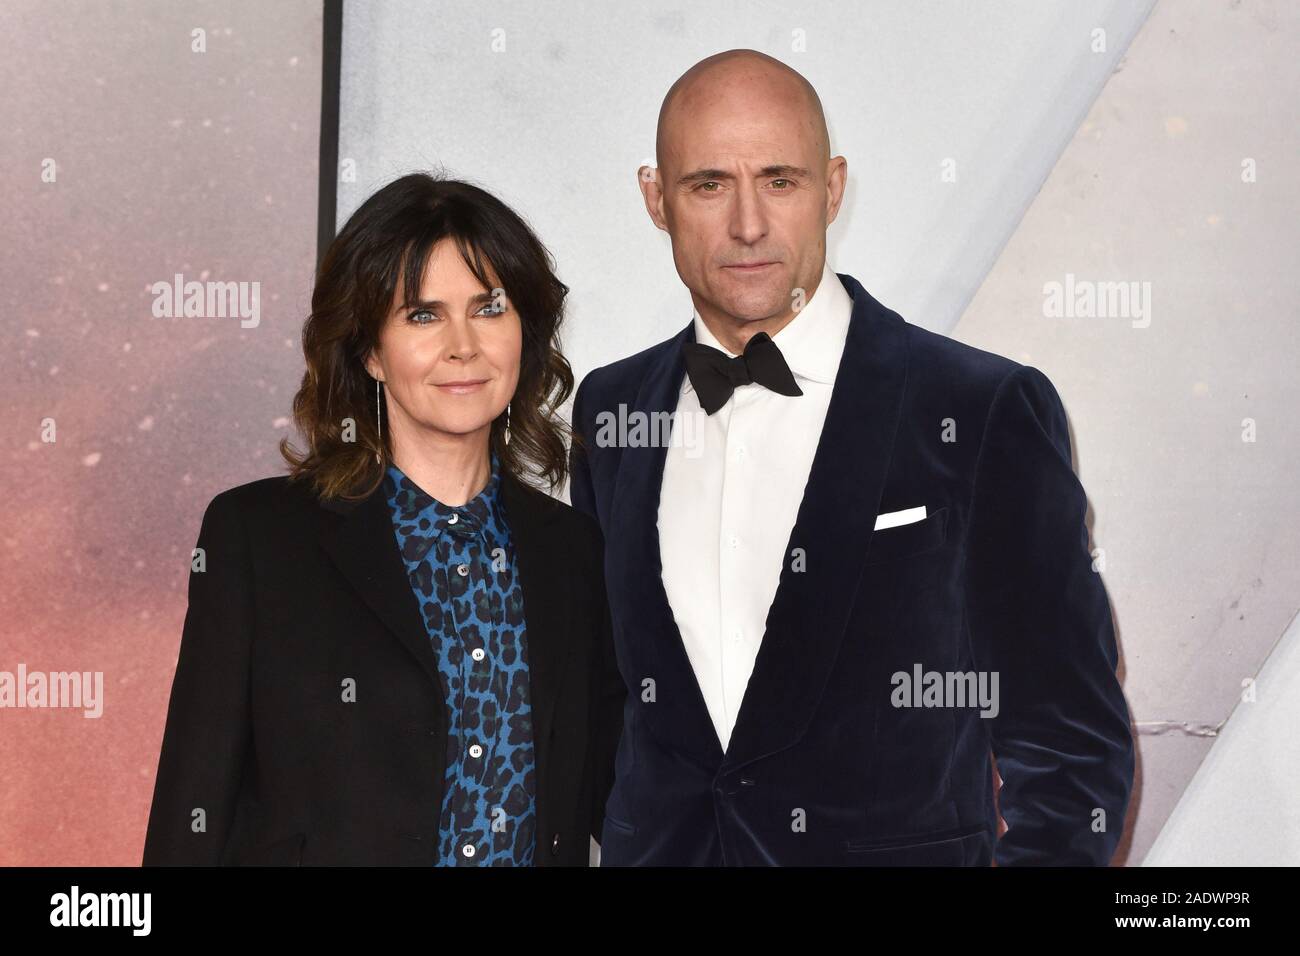 Liza Marshall and Mark Strong attend the World Premiere and Royal Performance of '1917' at Odeon Luxe Leicester Square in London. Stock Photo